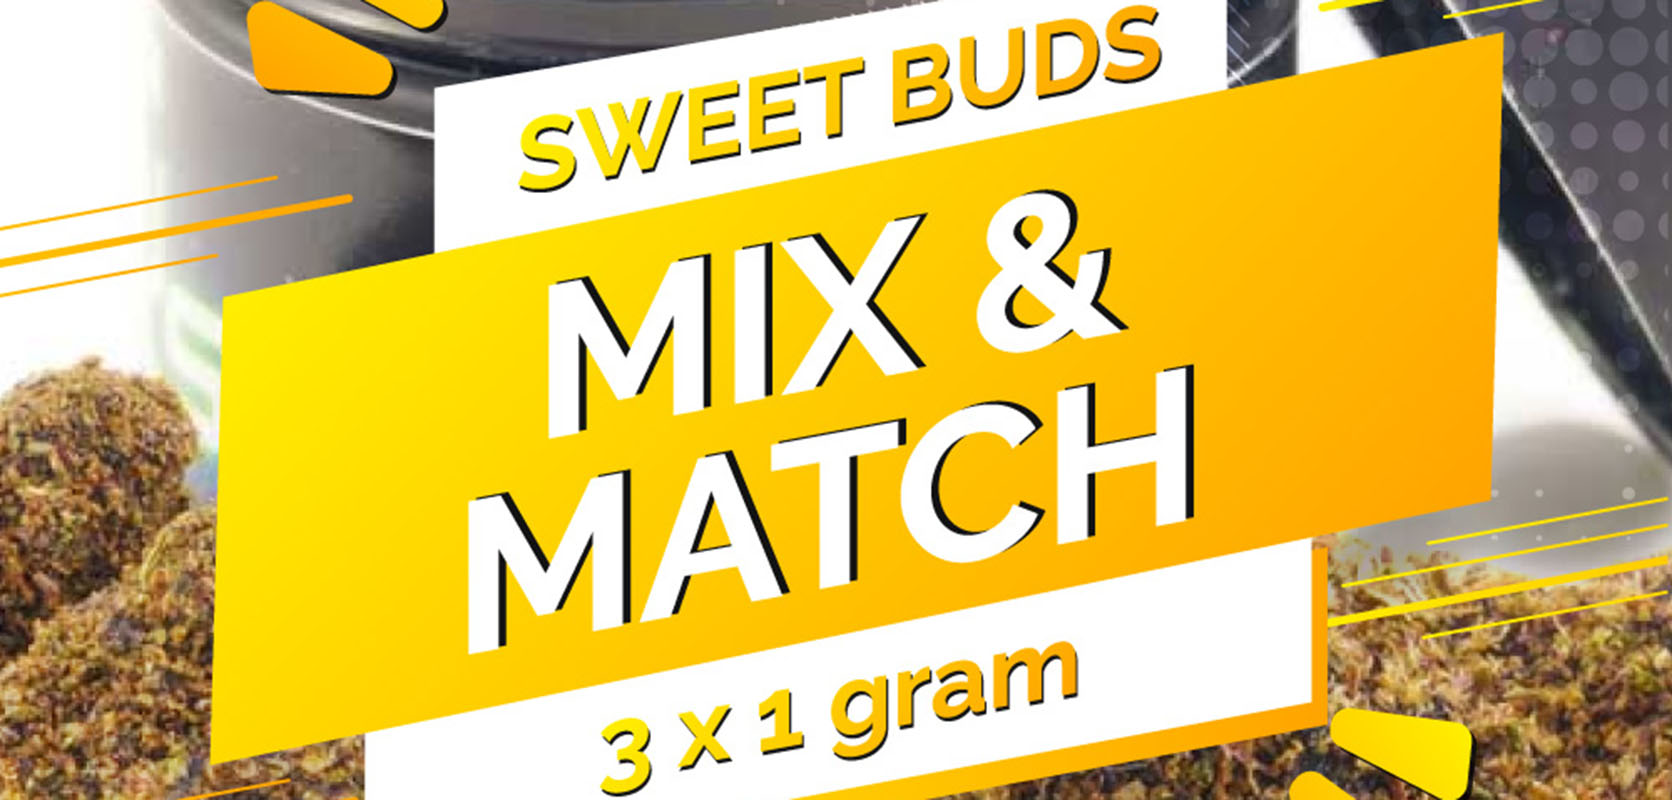 Sweet Bud Moon Rocks 1g Mix and Match 3. weed dispensary to buy cheapweed online in Canada. Shatter. buy online weeds.